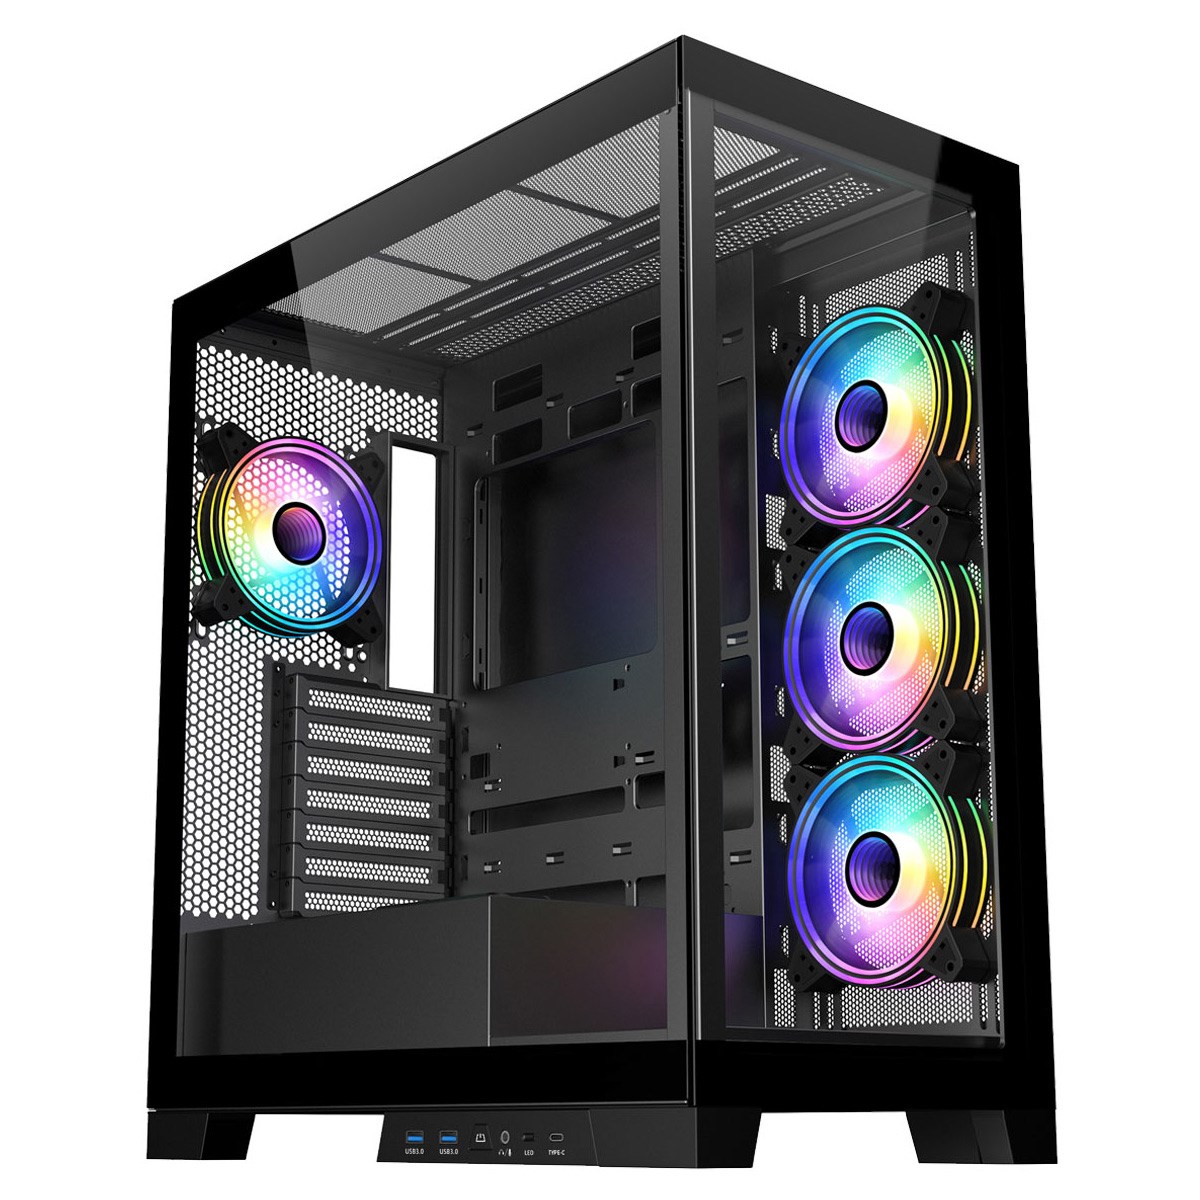 Photos - Computer Case CiT Pro Diamond XR Mid Tower Tempered Glass Gaming PC Case - Black -P-X 